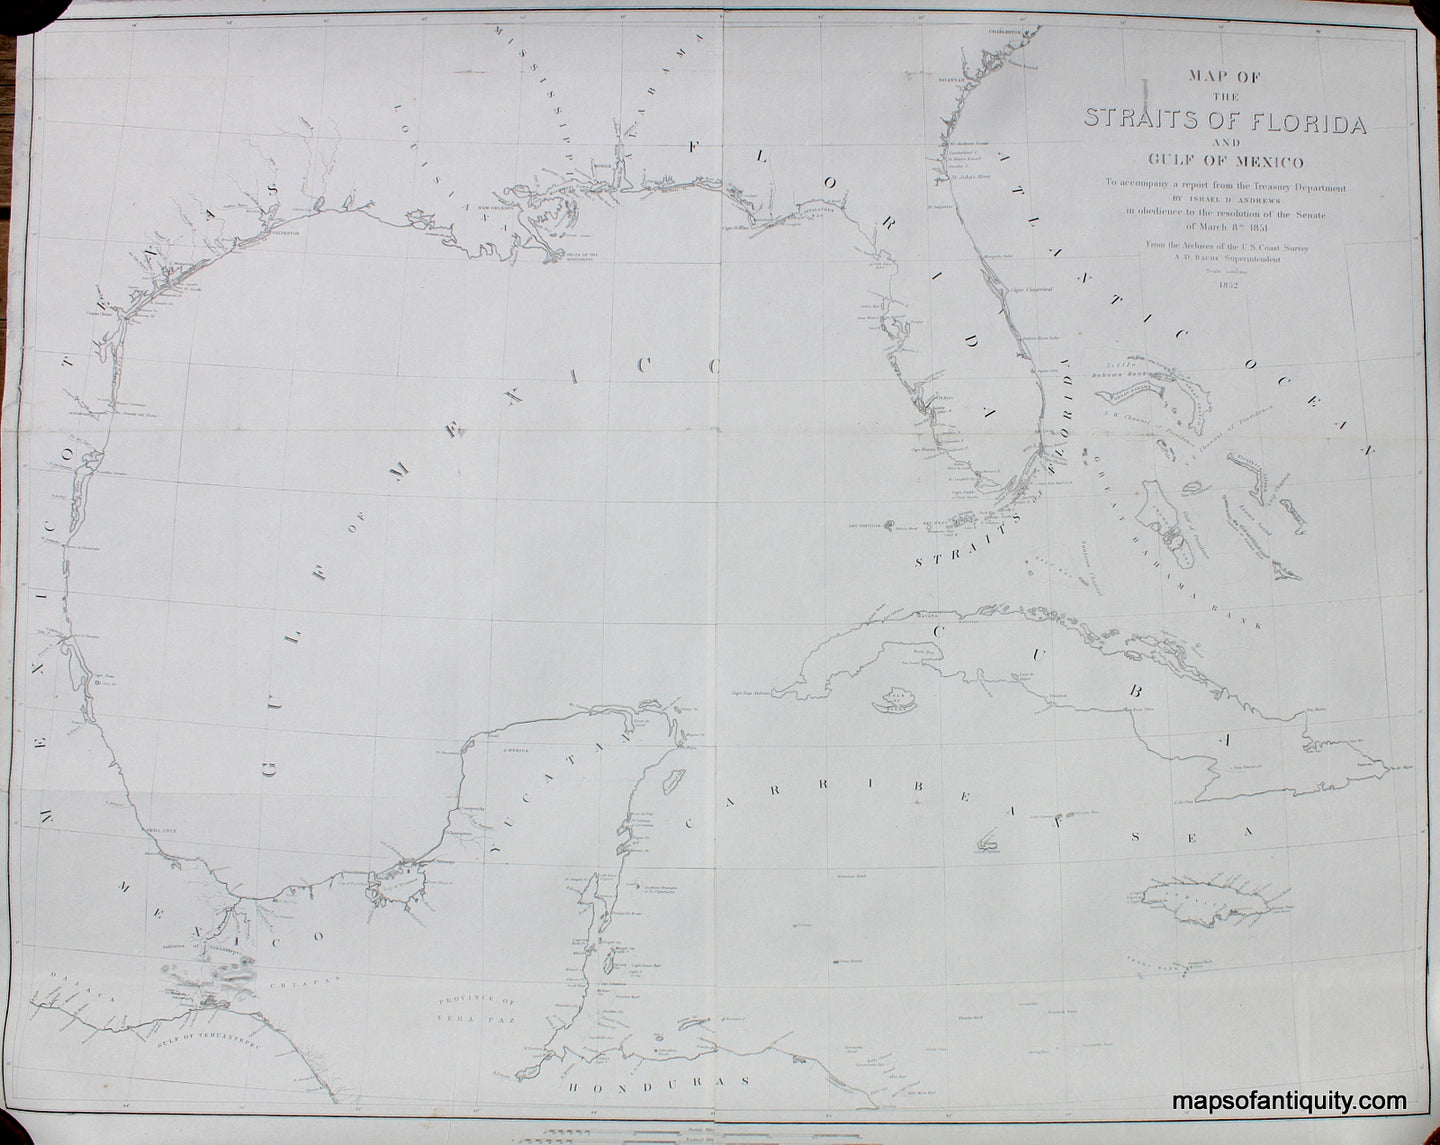 Black-and-White-Antique-Coastal-Chart-Map-of-the-Straits-of-Florida-and-Gulf-of-Mexico-**********-Antique-Nautical-Charts-Florida-1852-U.S.-Coast-Survey-Maps-Of-Antiquity